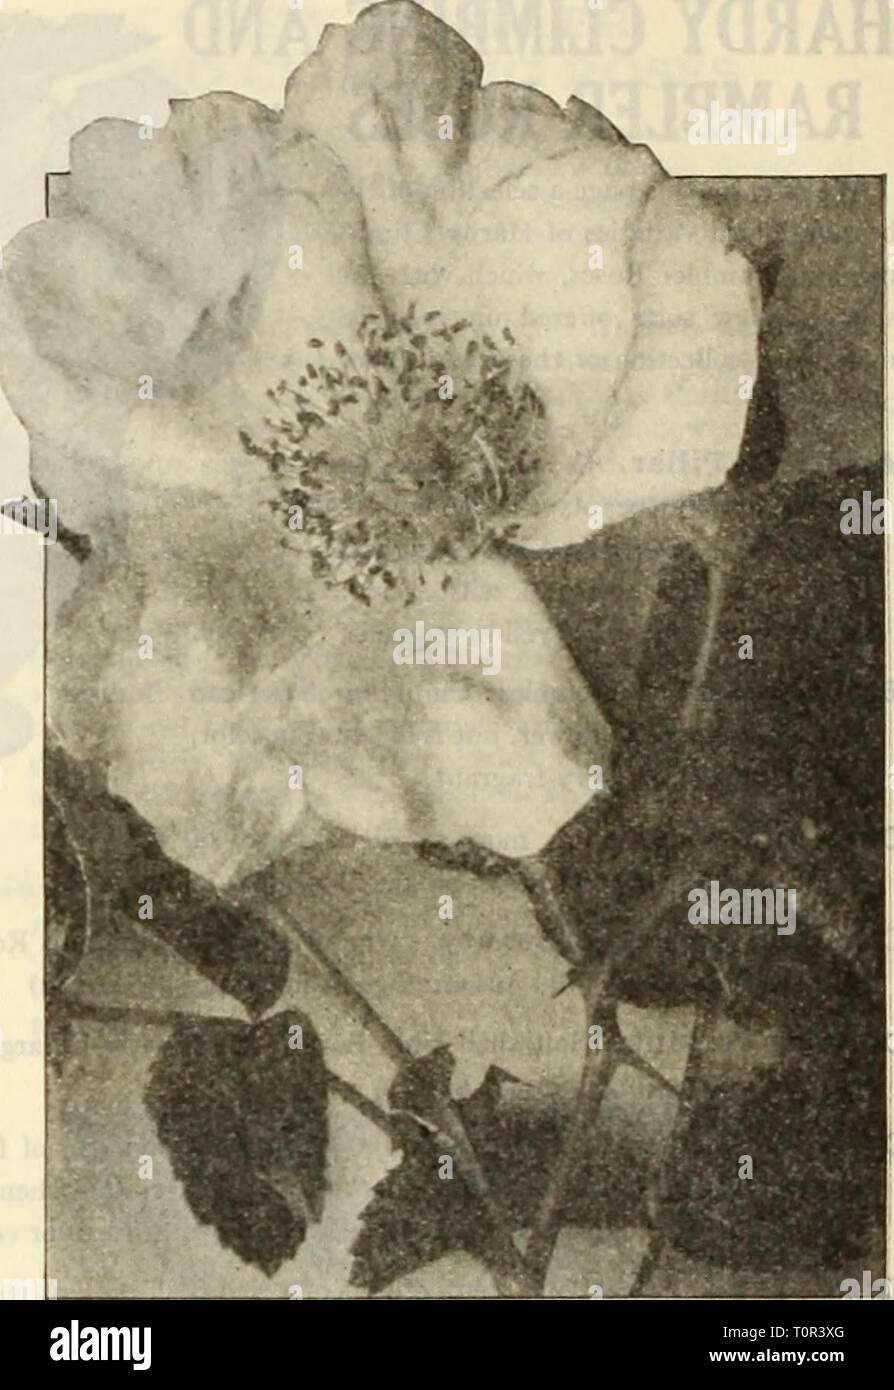 Dreer's autumn catalogue 1925 (1925) Dreer's autumn catalogue 1925  dreersautumncata1925henr Year: 1925  60 /flEHRXAlMtEER.^ SELECT-TV.OSES &gt;HlMPEIiPMIk New Hybrid Rugosa Rose F.J. Grootenderst This is a new type of Rose which might properly be called a Rugosa Baby Rambler, it being a cross between Rugosa and the crimson Baby Rambler. Imagine a shrub-like Rugosa Rose covered with trusses of crimson Baby Rambler Roses and you will have a fair conception of this new hybrid variety. It is not a Rose that you want to plant in with yqjir bed of Hybrid-Tea or Hybrid Perpetual Roses, but is valua Stock Photo